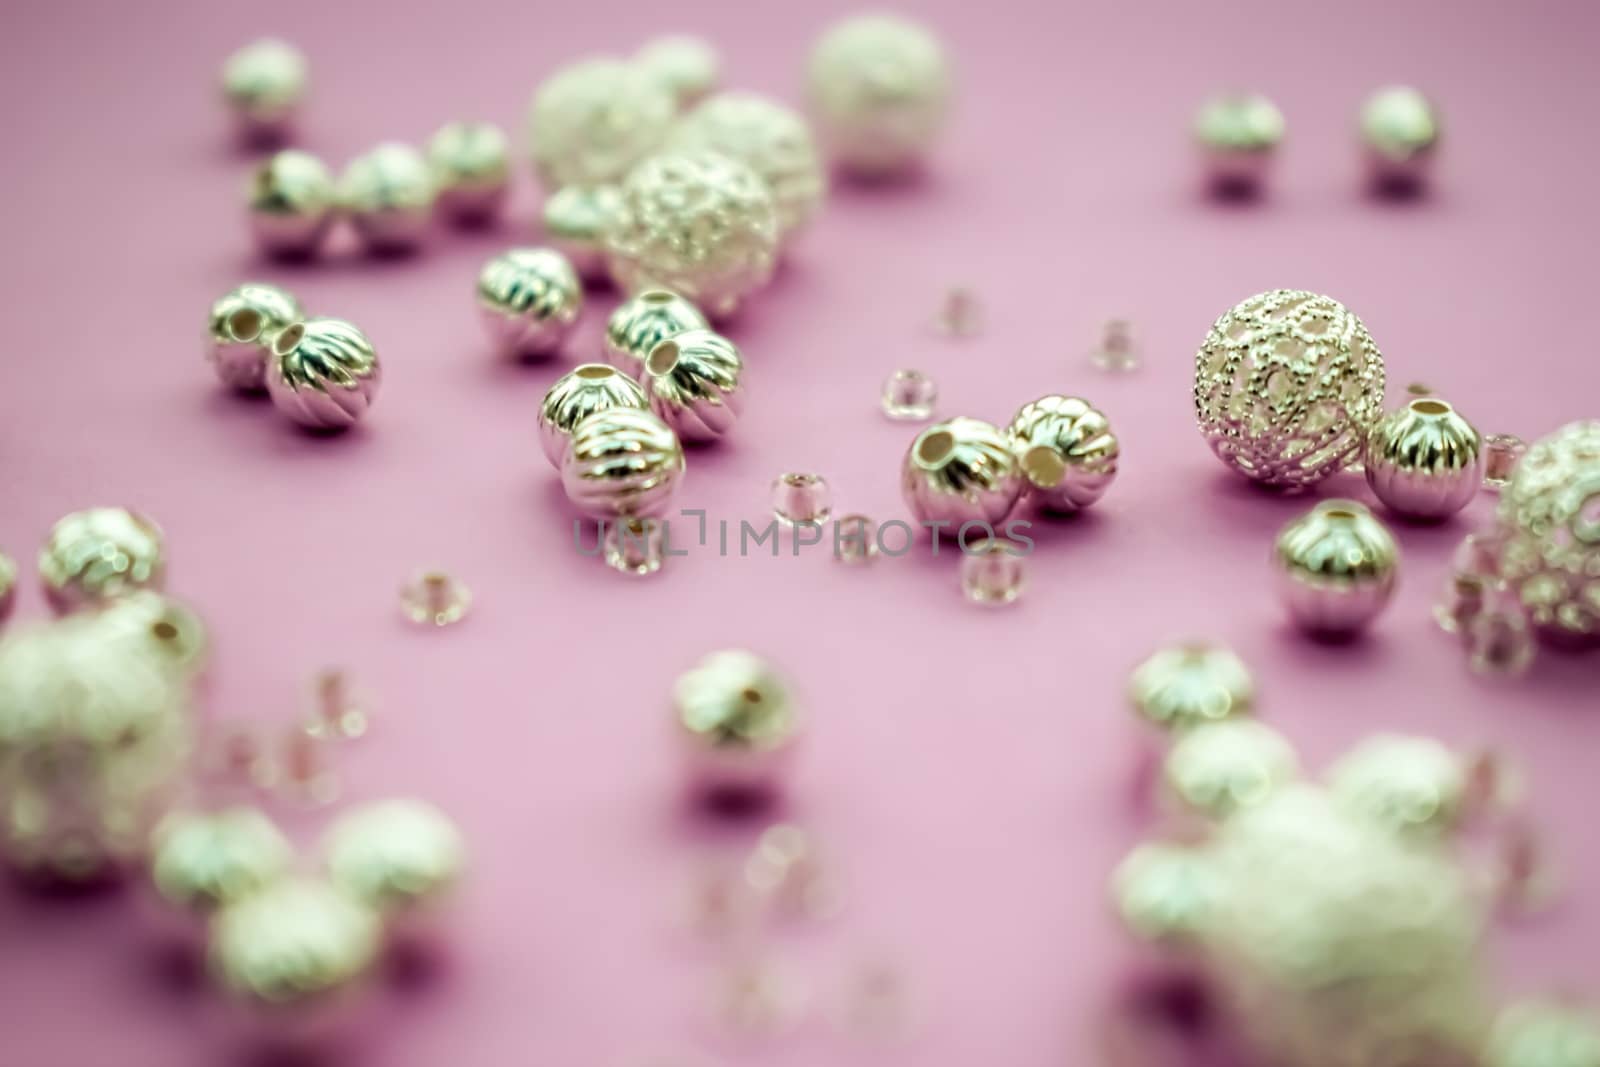 selection of scattered silver beads on pink background by sarahdavies576@gmail.com